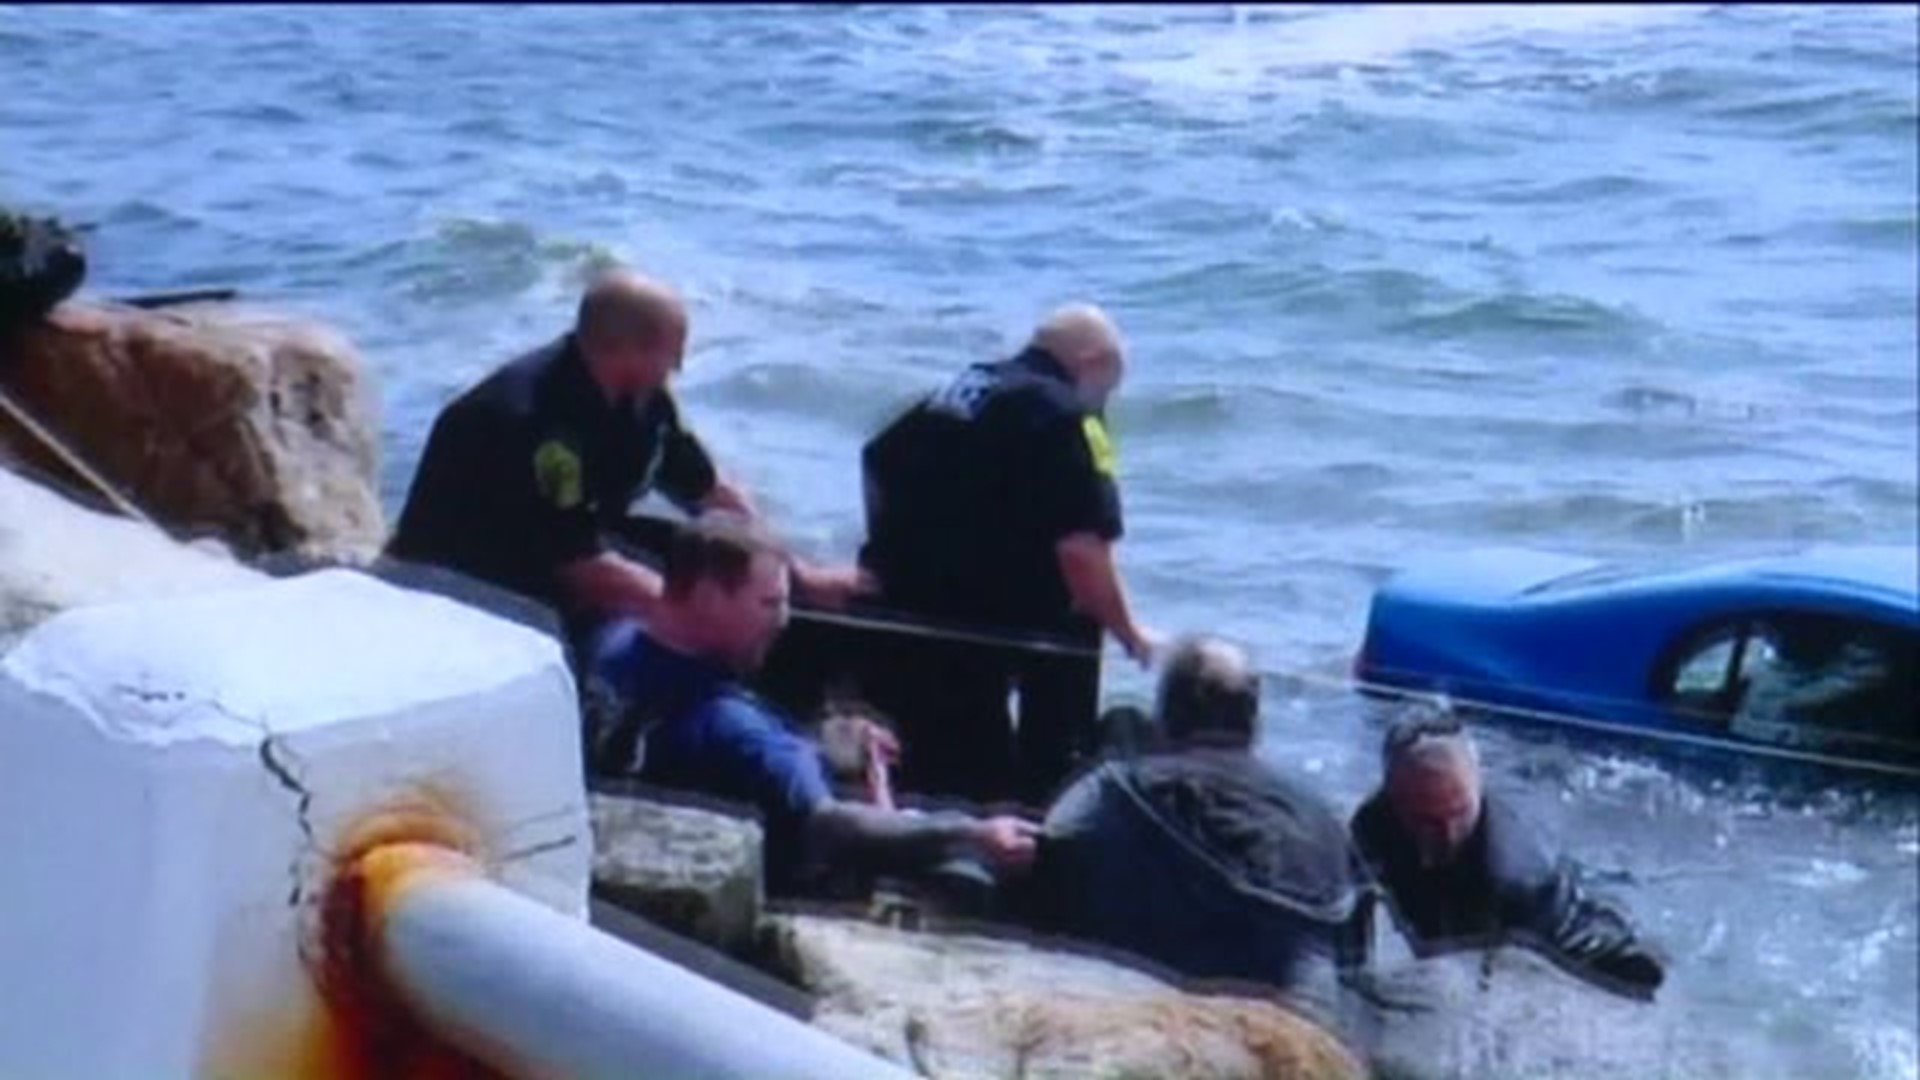 Incredible water rescue caught on camera